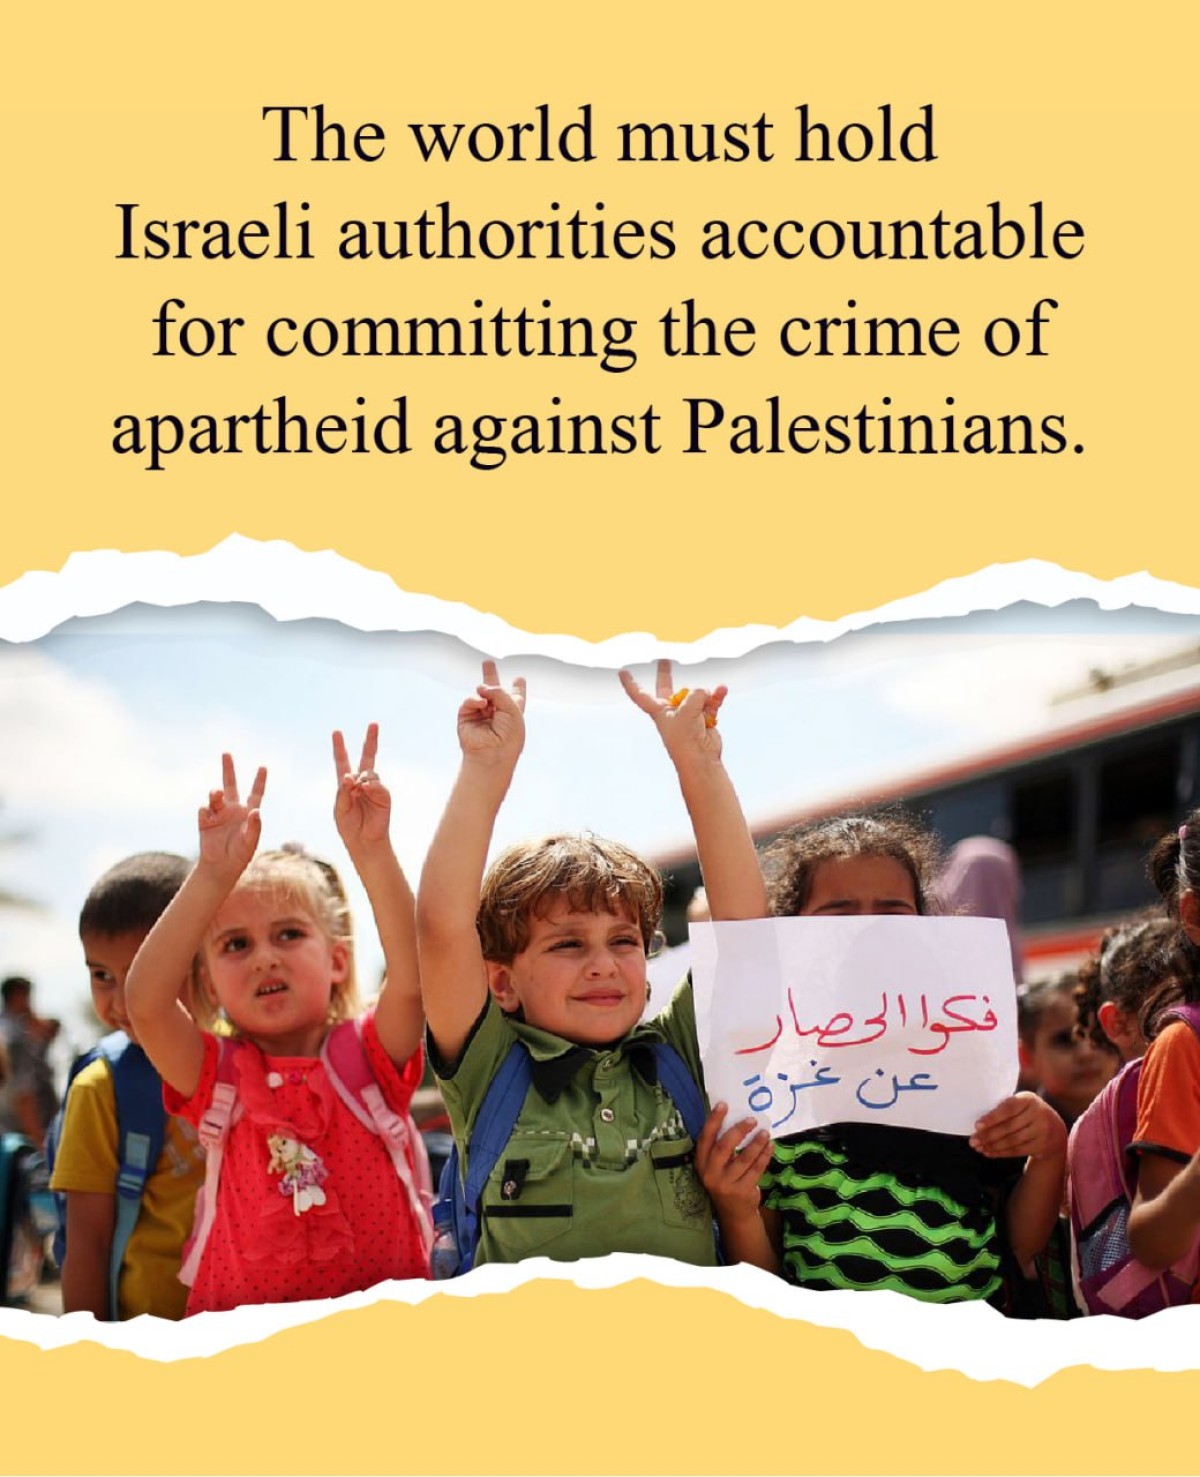 The world must hold Israeli authorities accountable for committing the crime of apartheid against Palestinians.